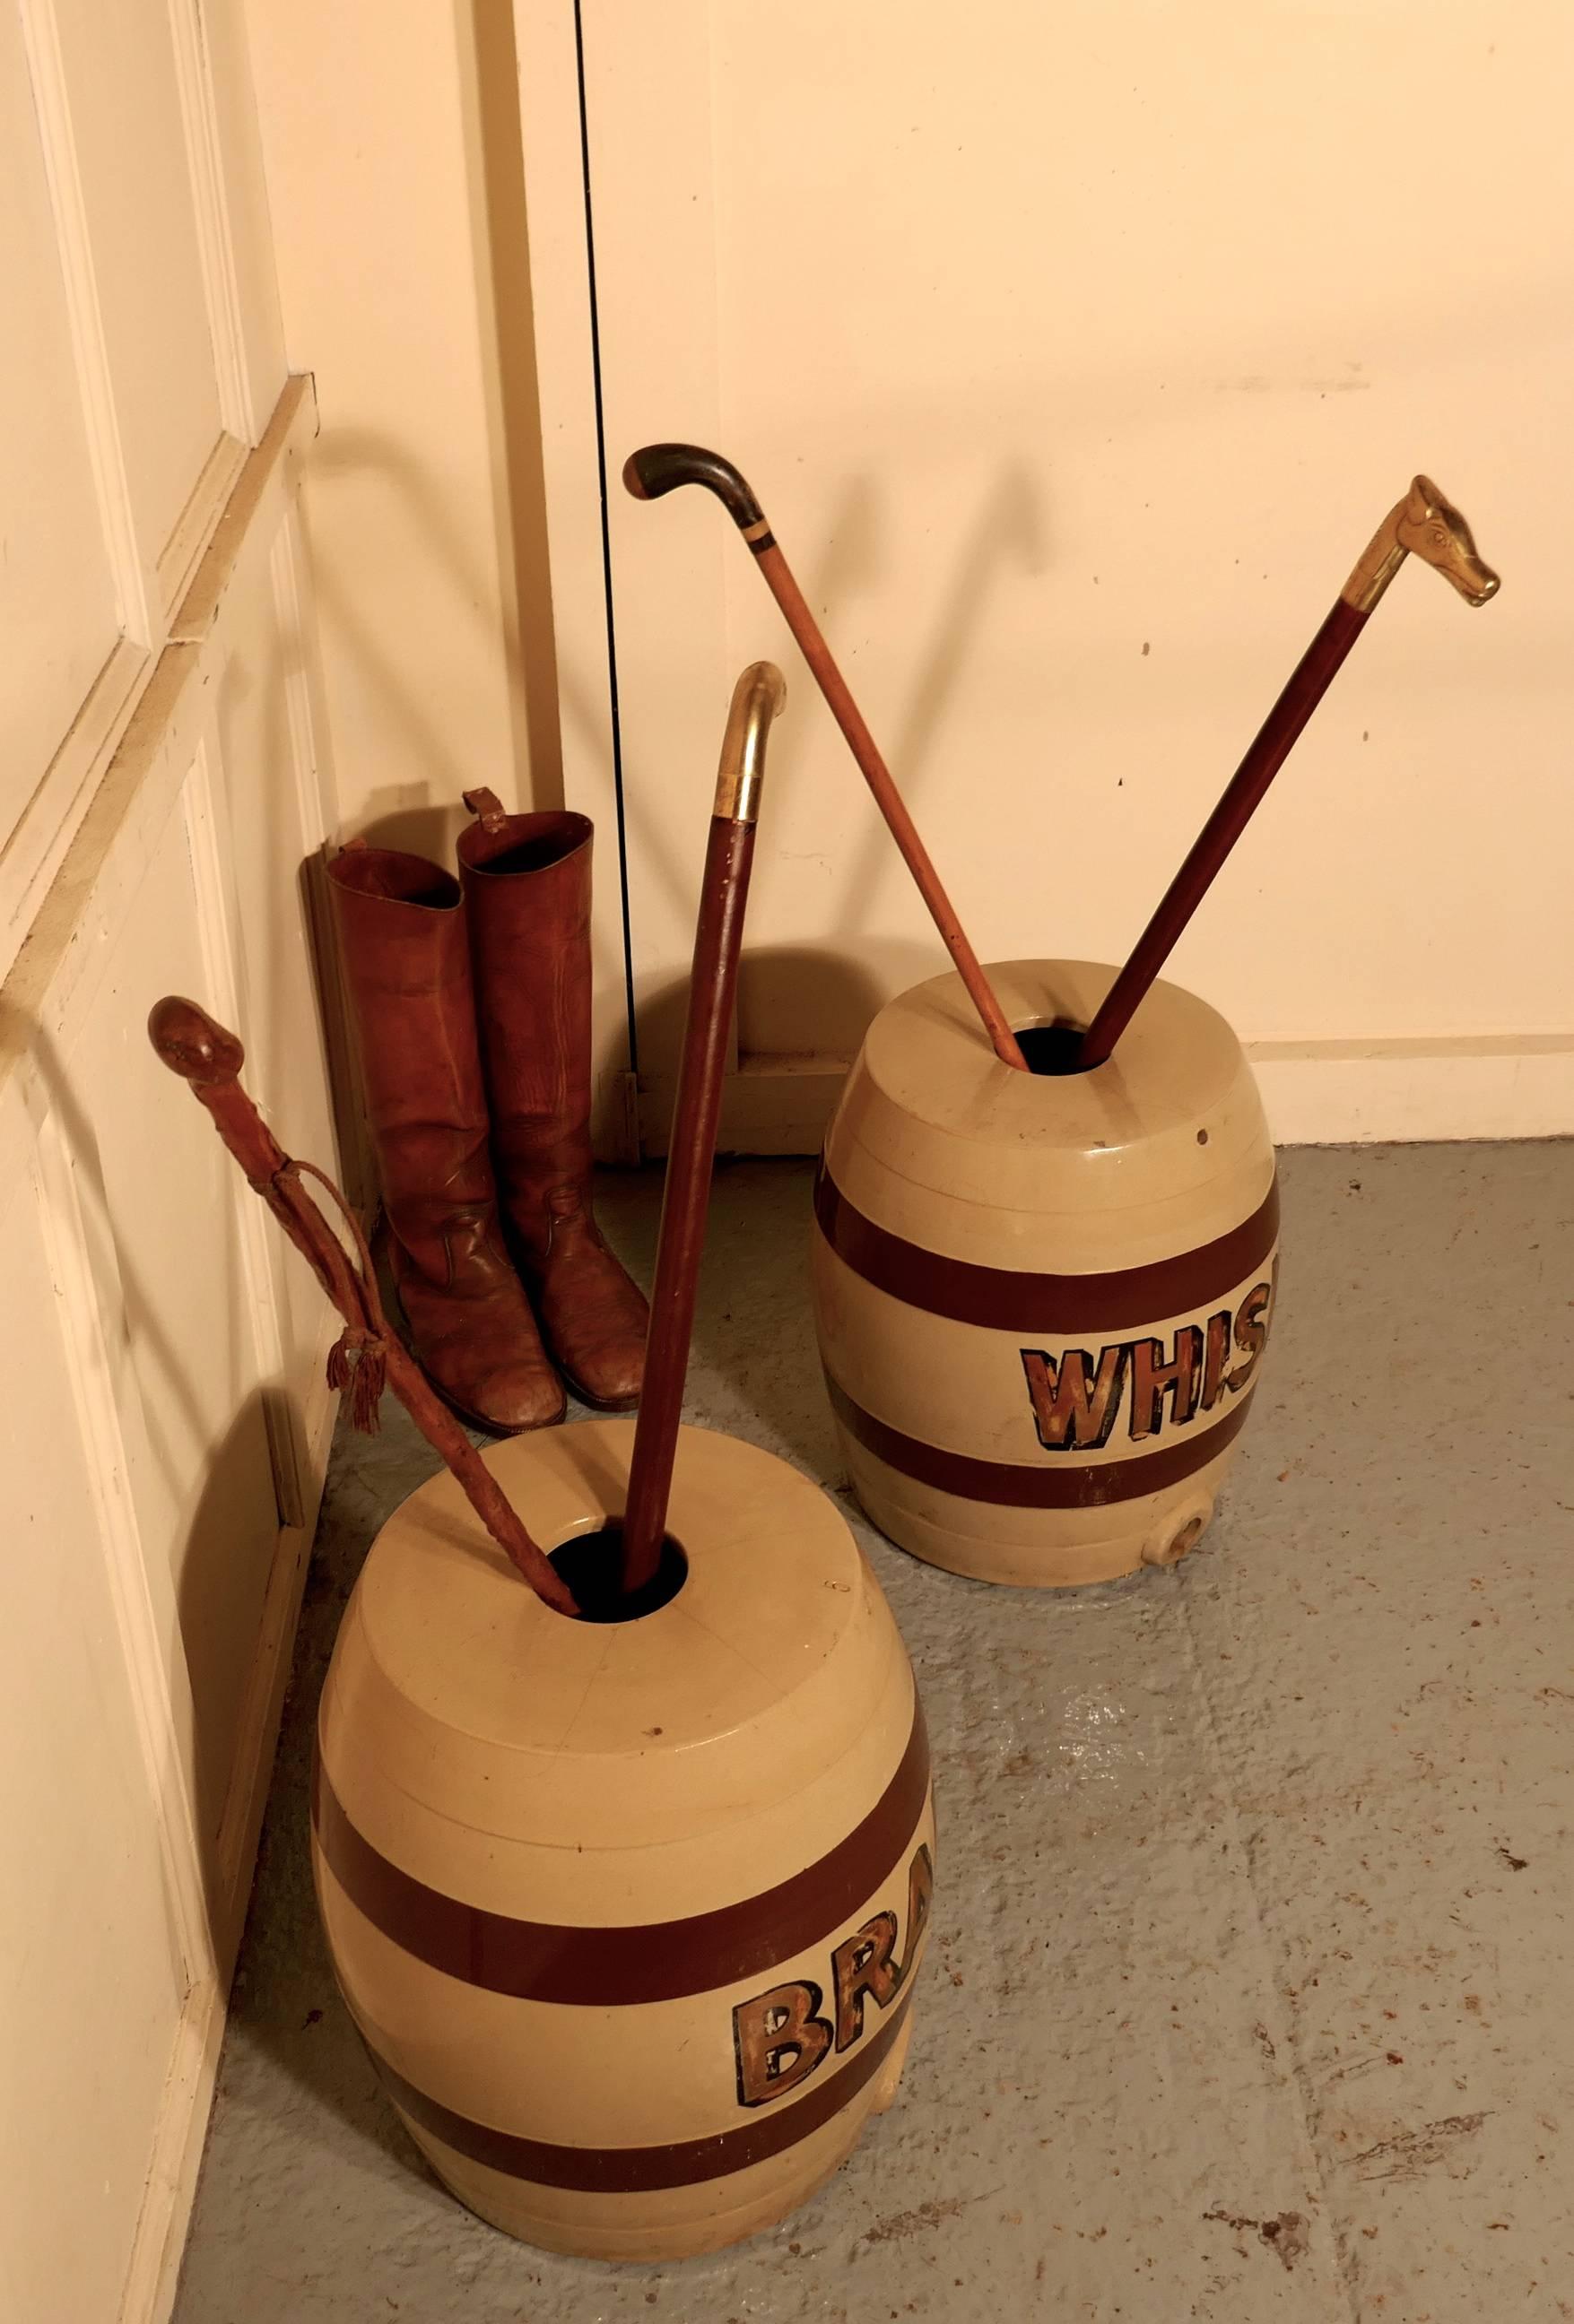 A large pair of 19th century stoneware brandy and whisky barrels, quirky umbrella and stick stands

These large stoneware brandy barrels are in good used condition with traditional hooped design, and Whisky written on one and Brandy on the